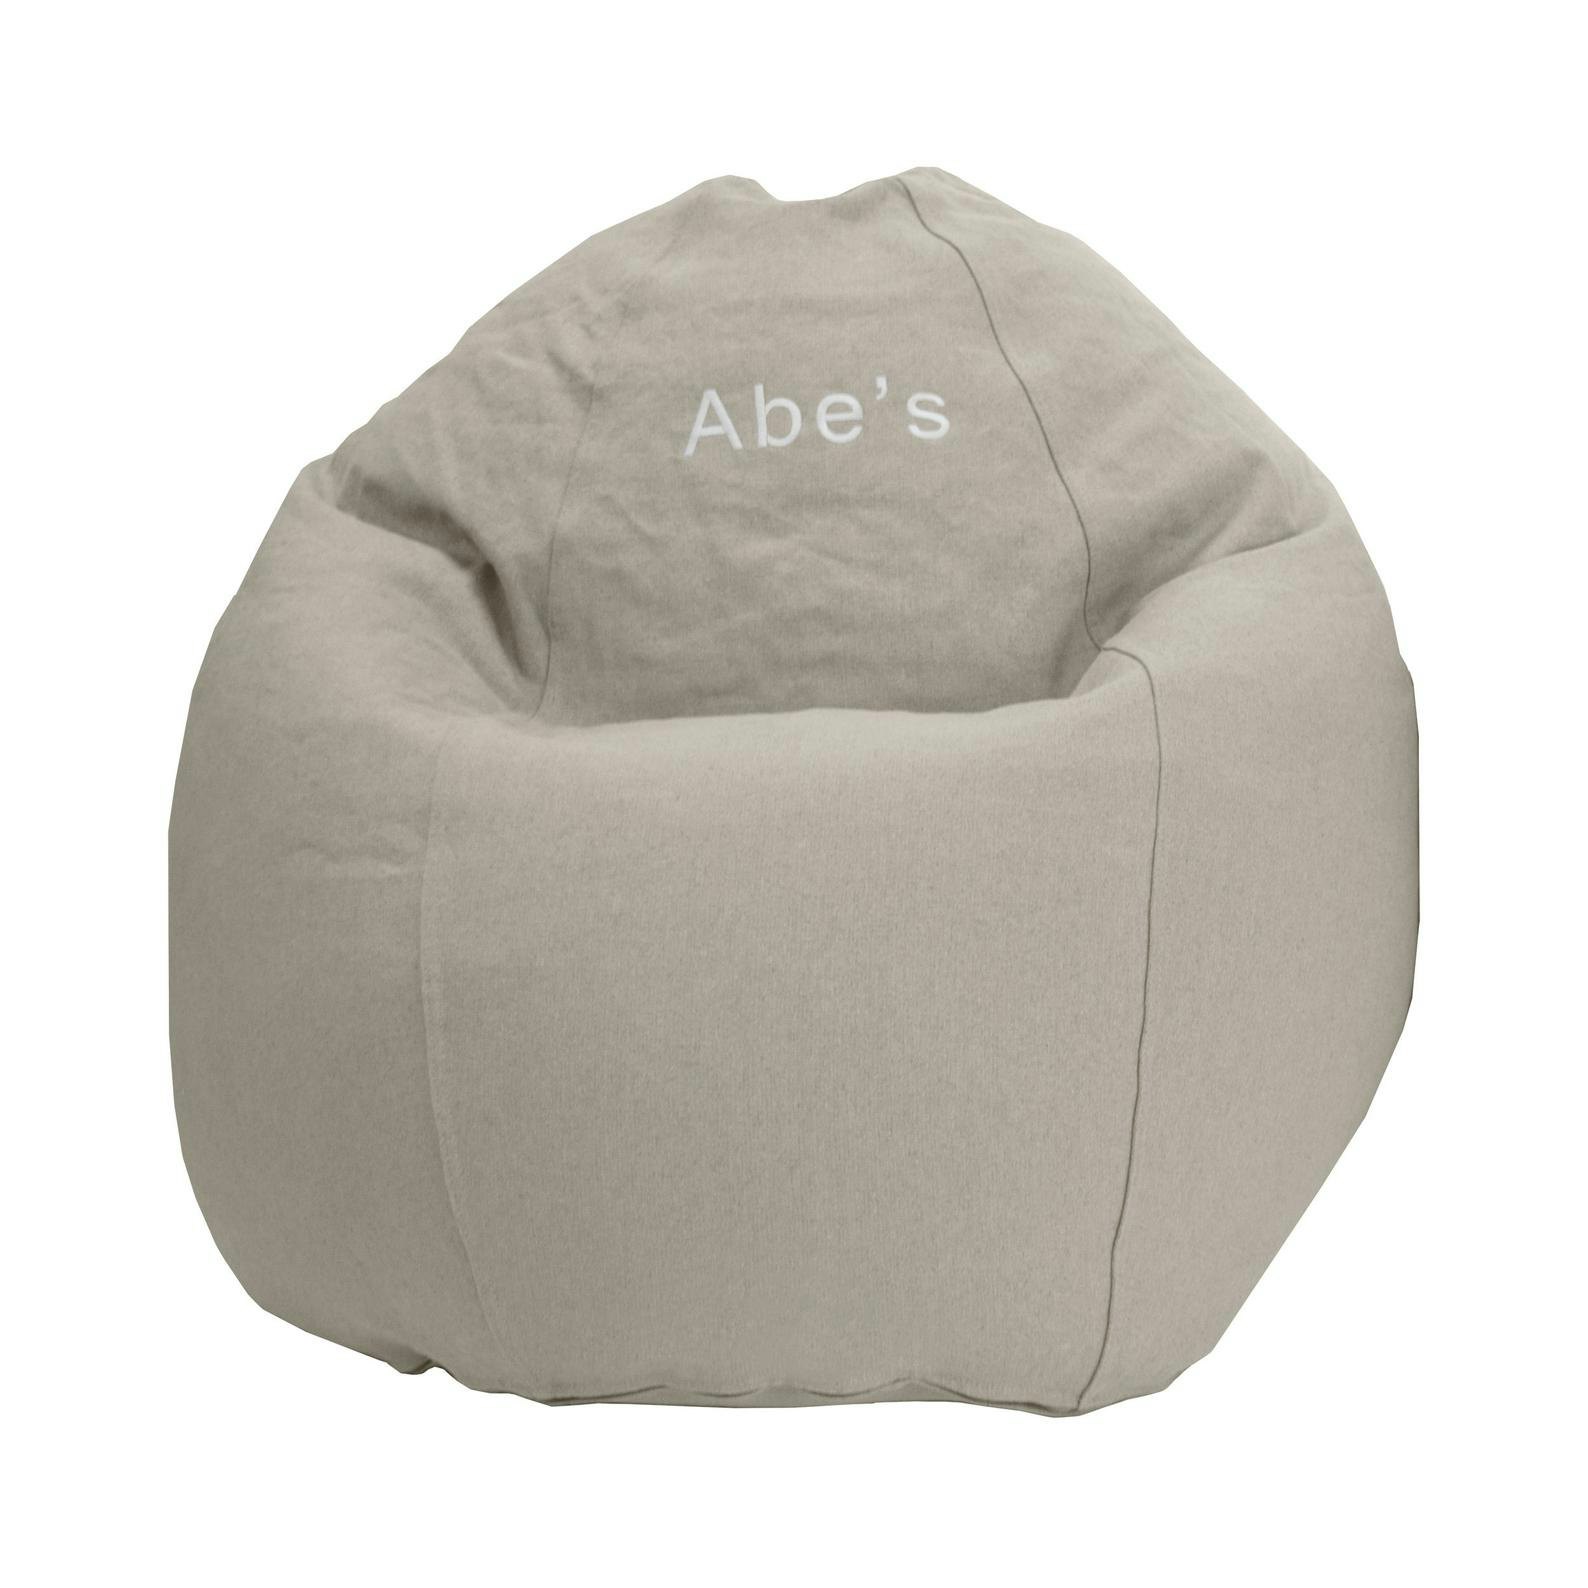 embroidered bean bag chairs